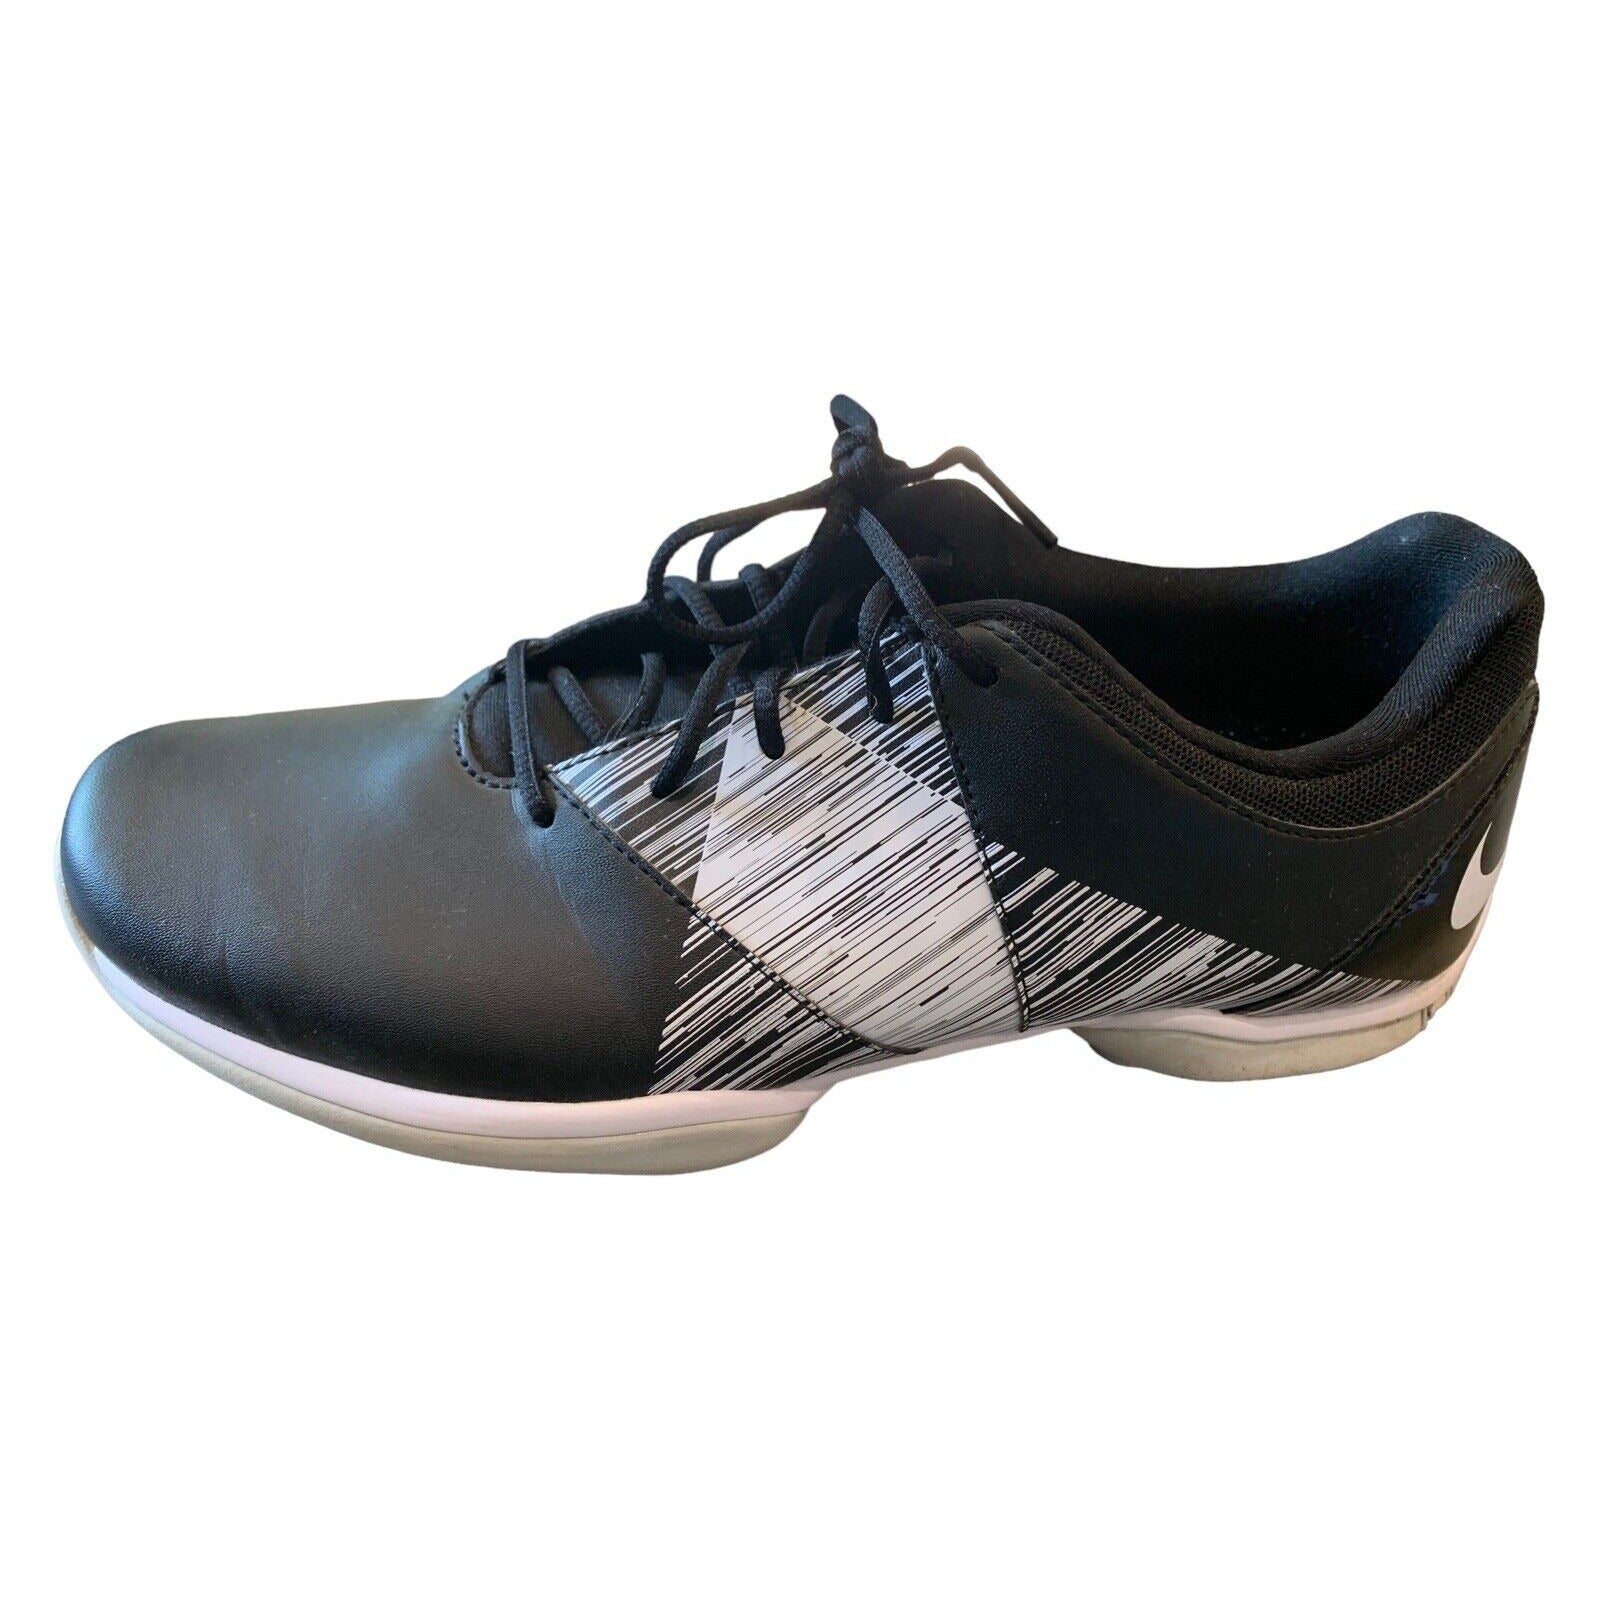 Black And White Women's Golf TAC Shoe